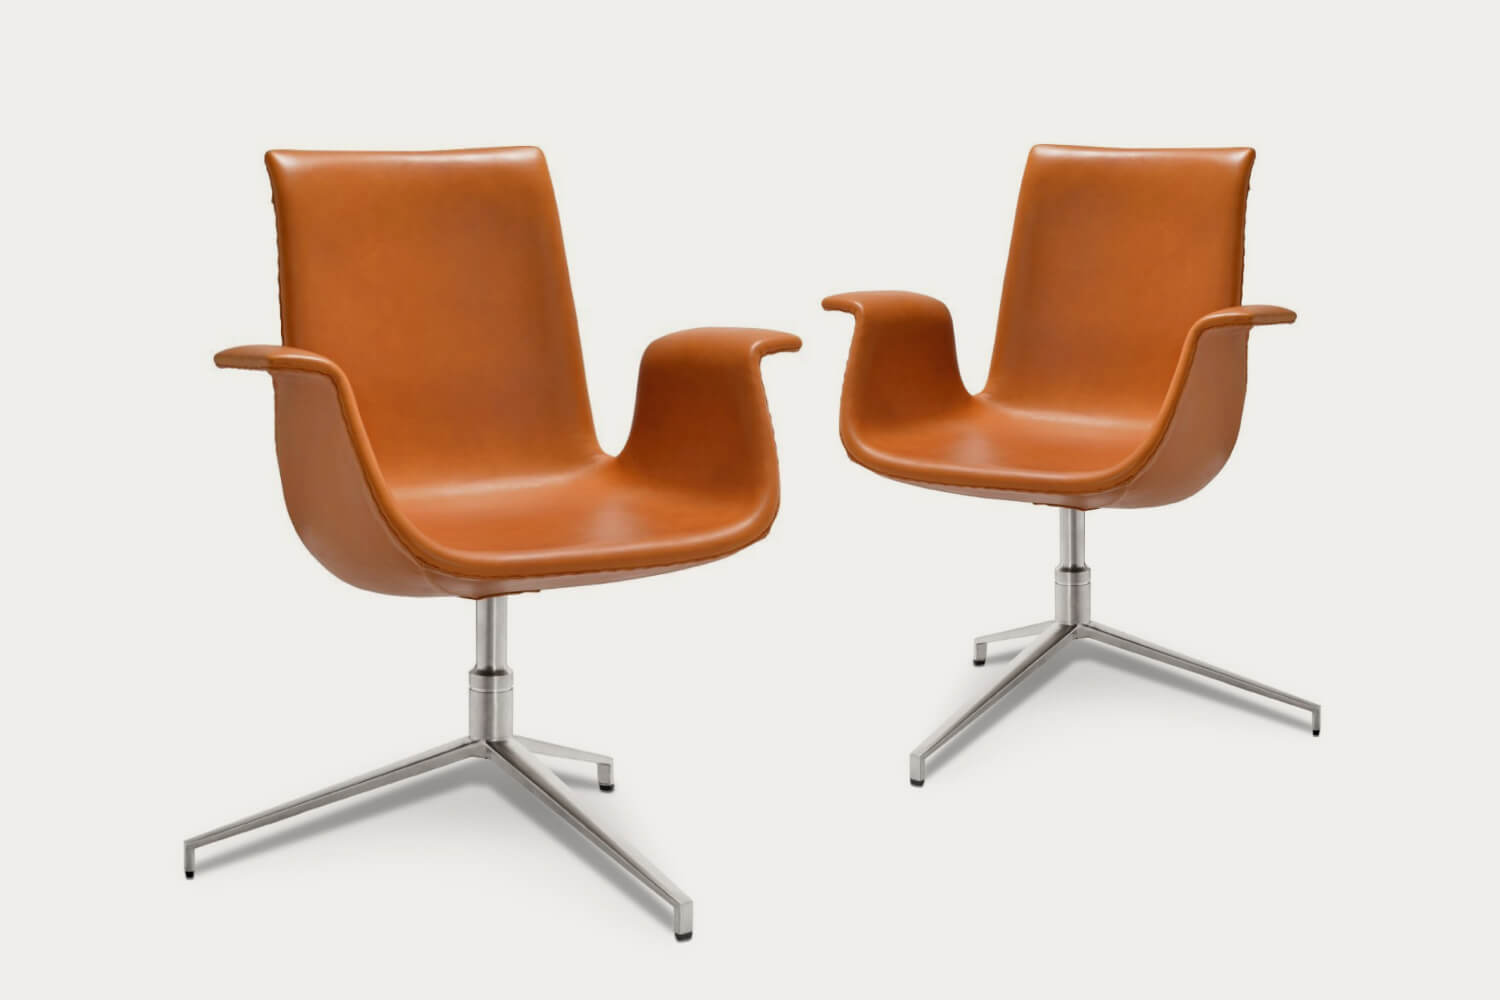 Two mid-century modern caramel brown Fk 6726 Bucket Chairs - Classic Edition, isolated against a white background.